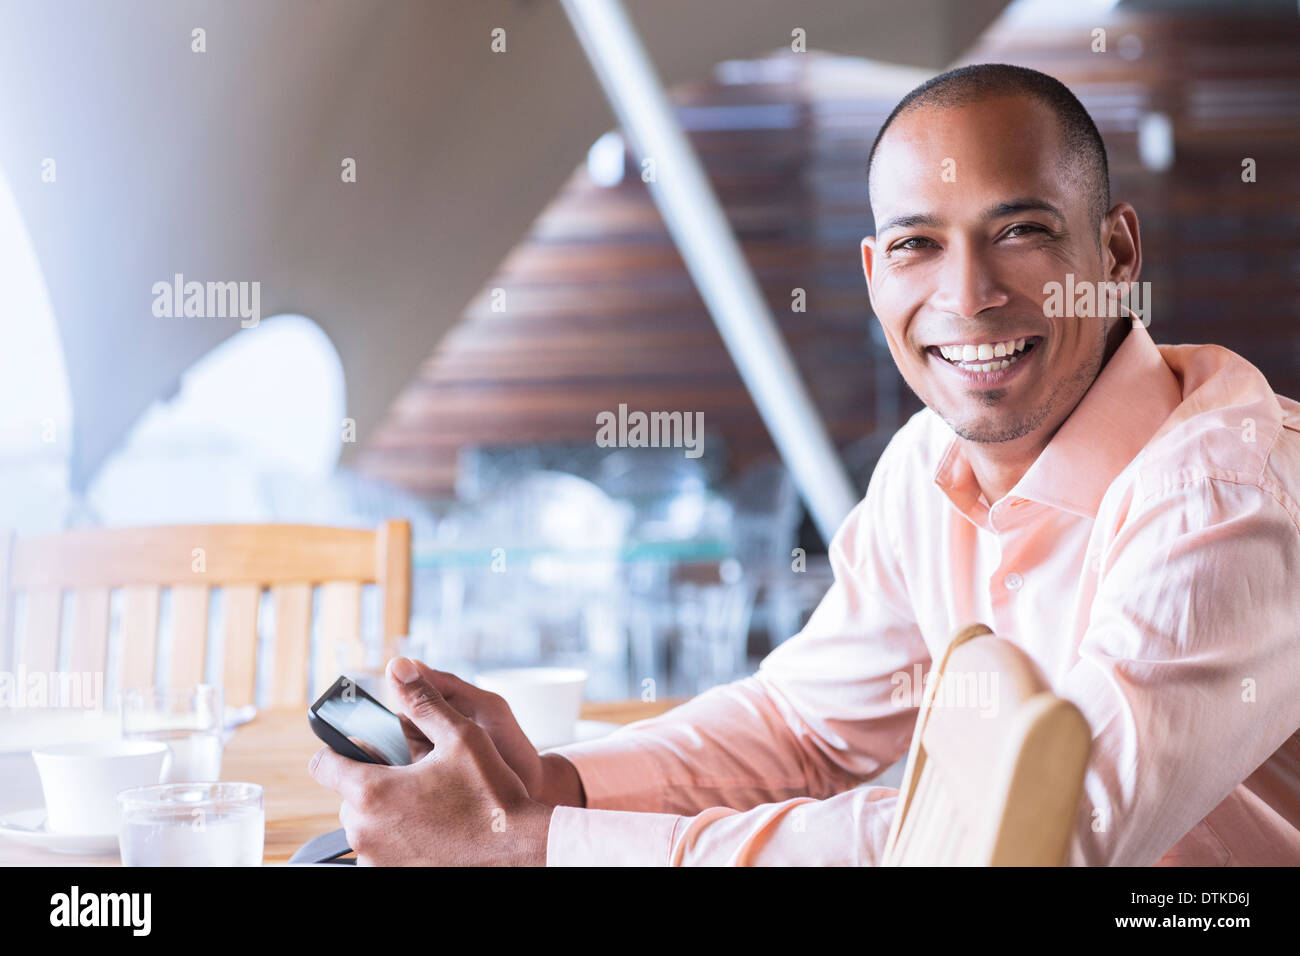 Businessman using cell phone in office Banque D'Images